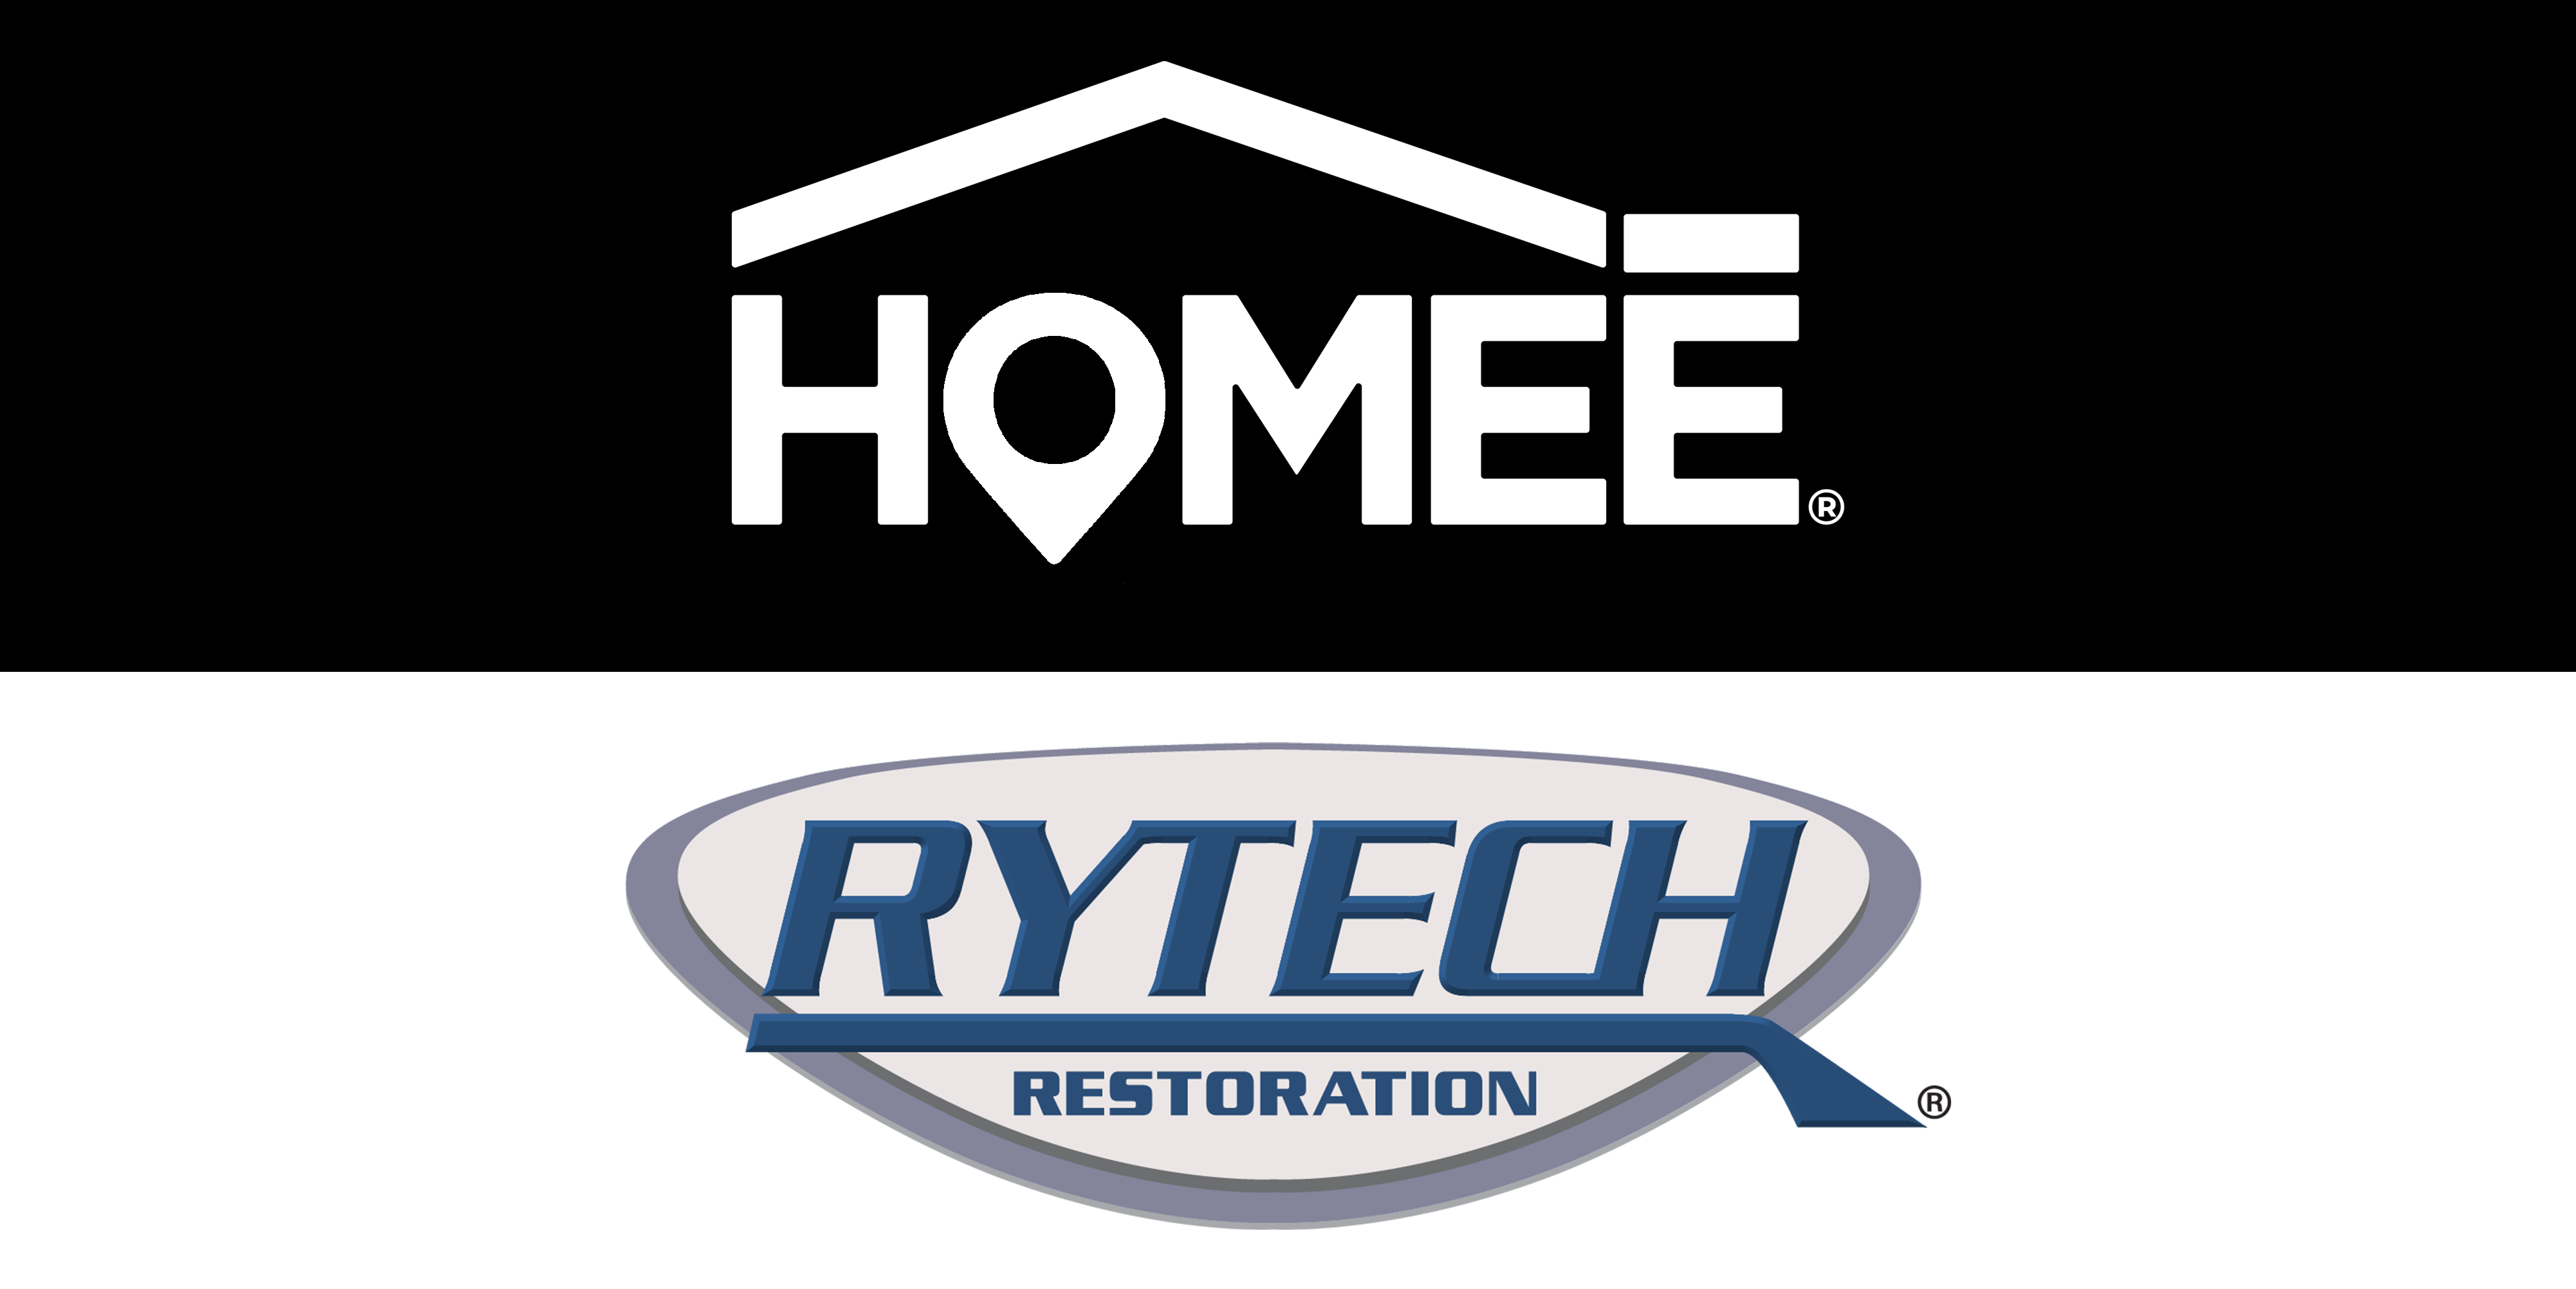 HOMEE Announces National Partnership with Rytech Restoration